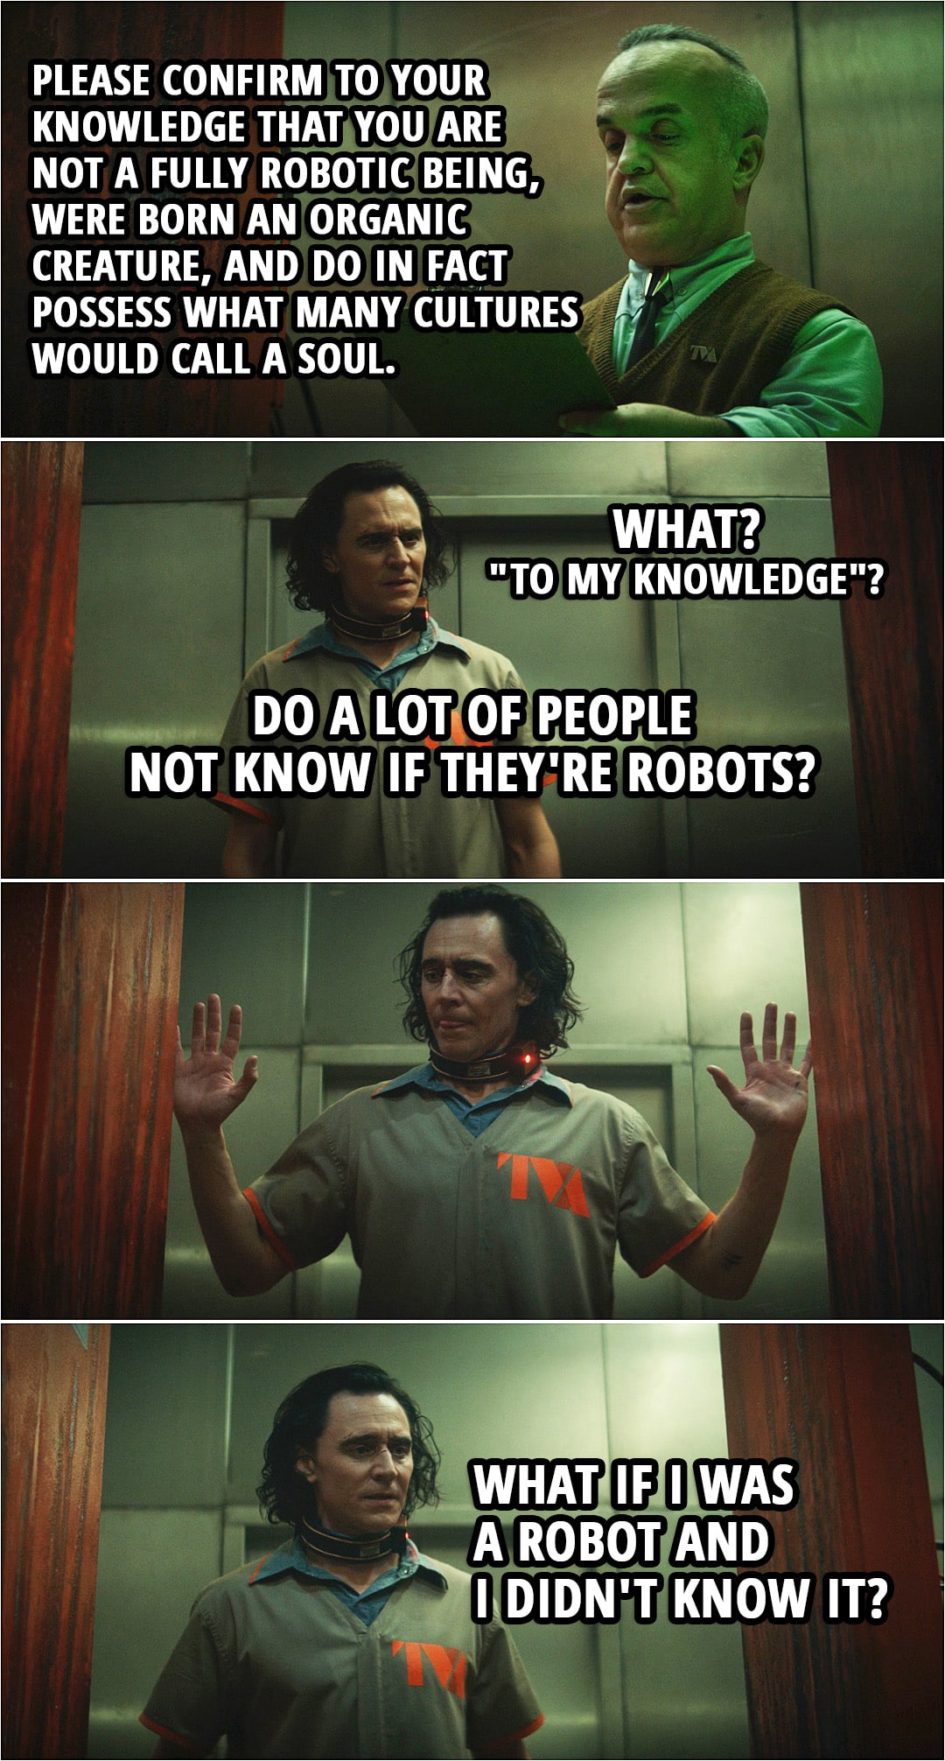 Quote from Loki 1x01 | Robot Scanner: Please confirm to your knowledge that you are not a fully robotic being, were born an organic creature, and do in fact possess what many cultures would call a soul. Loki: What? "To my knowledge"? Do a lot of people not know if they're robots? Robot Scanner: Thank you for your confirmation. Please, move through. Loki: What if I was a robot and I didn't know it? Robot Scanner: The machine would melt you from the inside out. Please move along, sir. Loki: Okay, I'm not a robot, so I'll be fine.